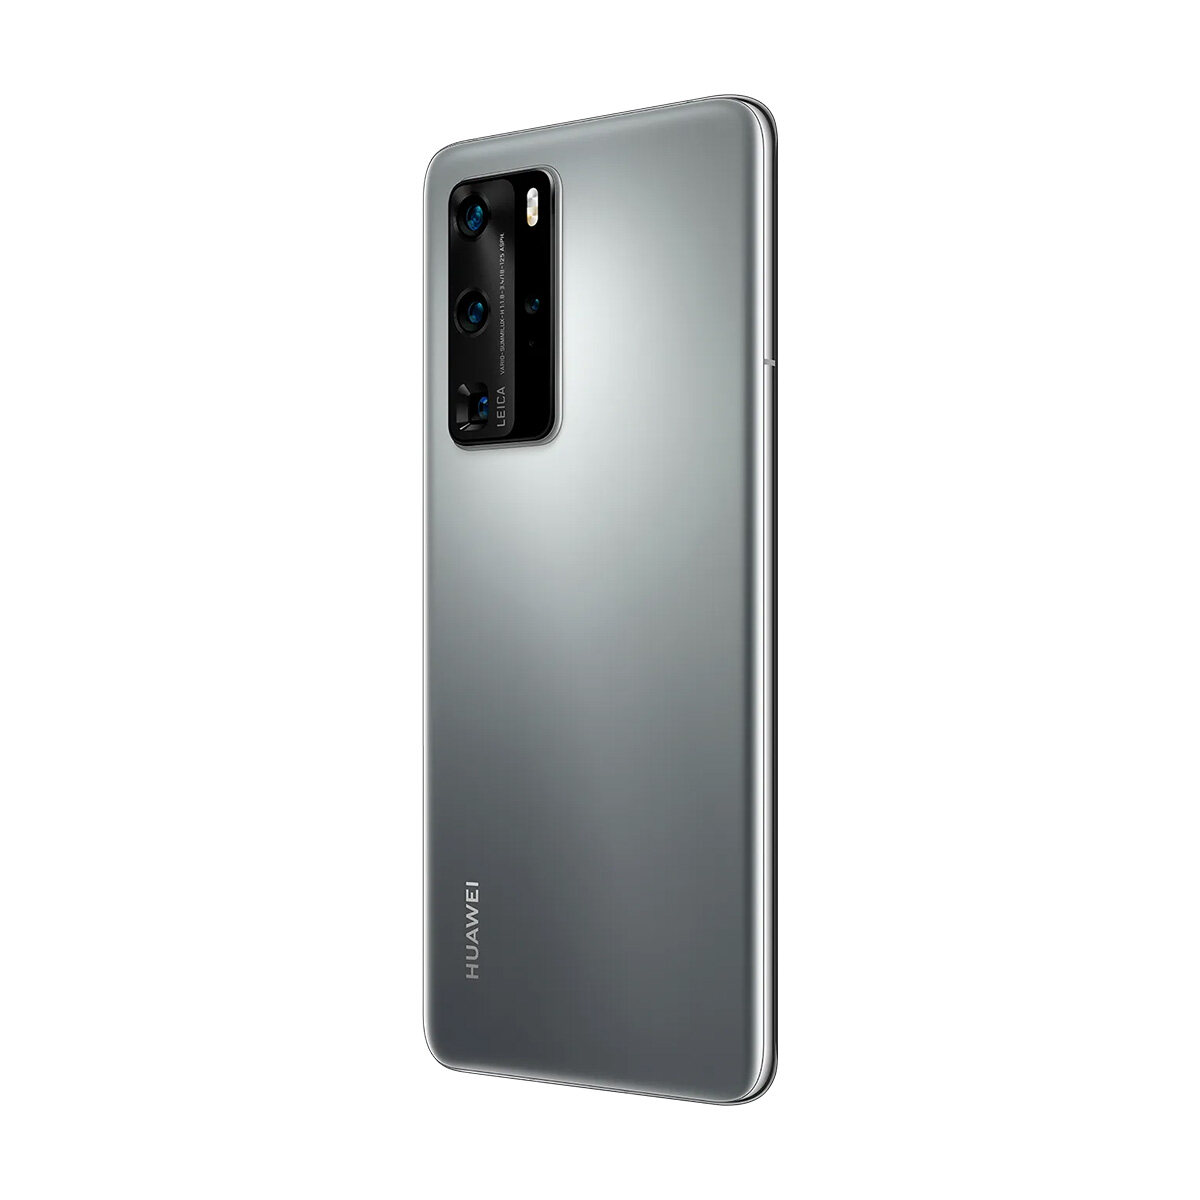 Huawei P40 Pro 5G Smartphone 8GB RAM + 256GB ROM Visionary Photography (Blue,Silver,Gold)